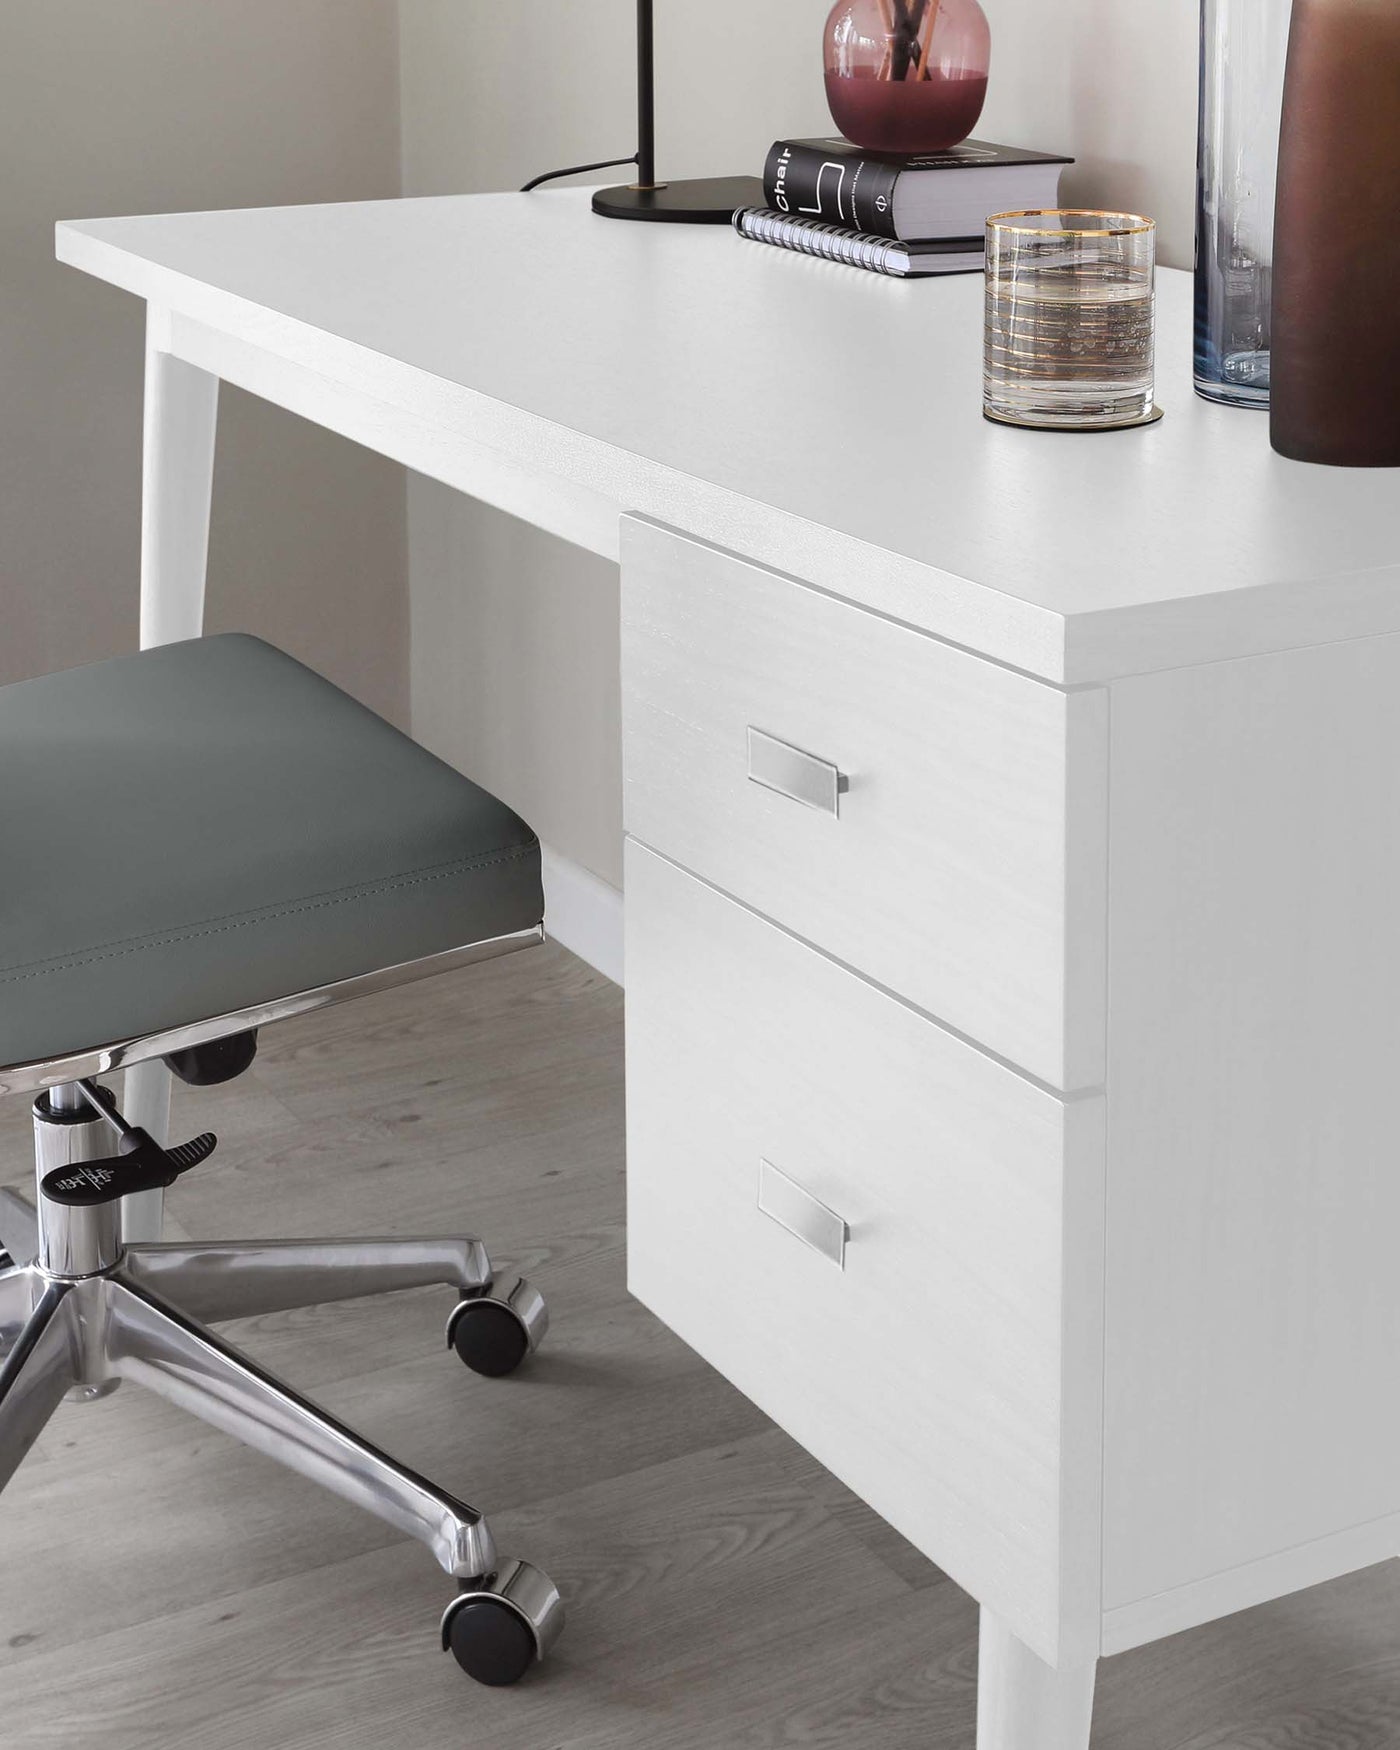 A modern white desk with clean lines, featuring an uncluttered tabletop and two drawers with simple rectangular silver handles. Paired with the desk is a grey upholstered office chair with a metallic base and caster wheels for mobility.